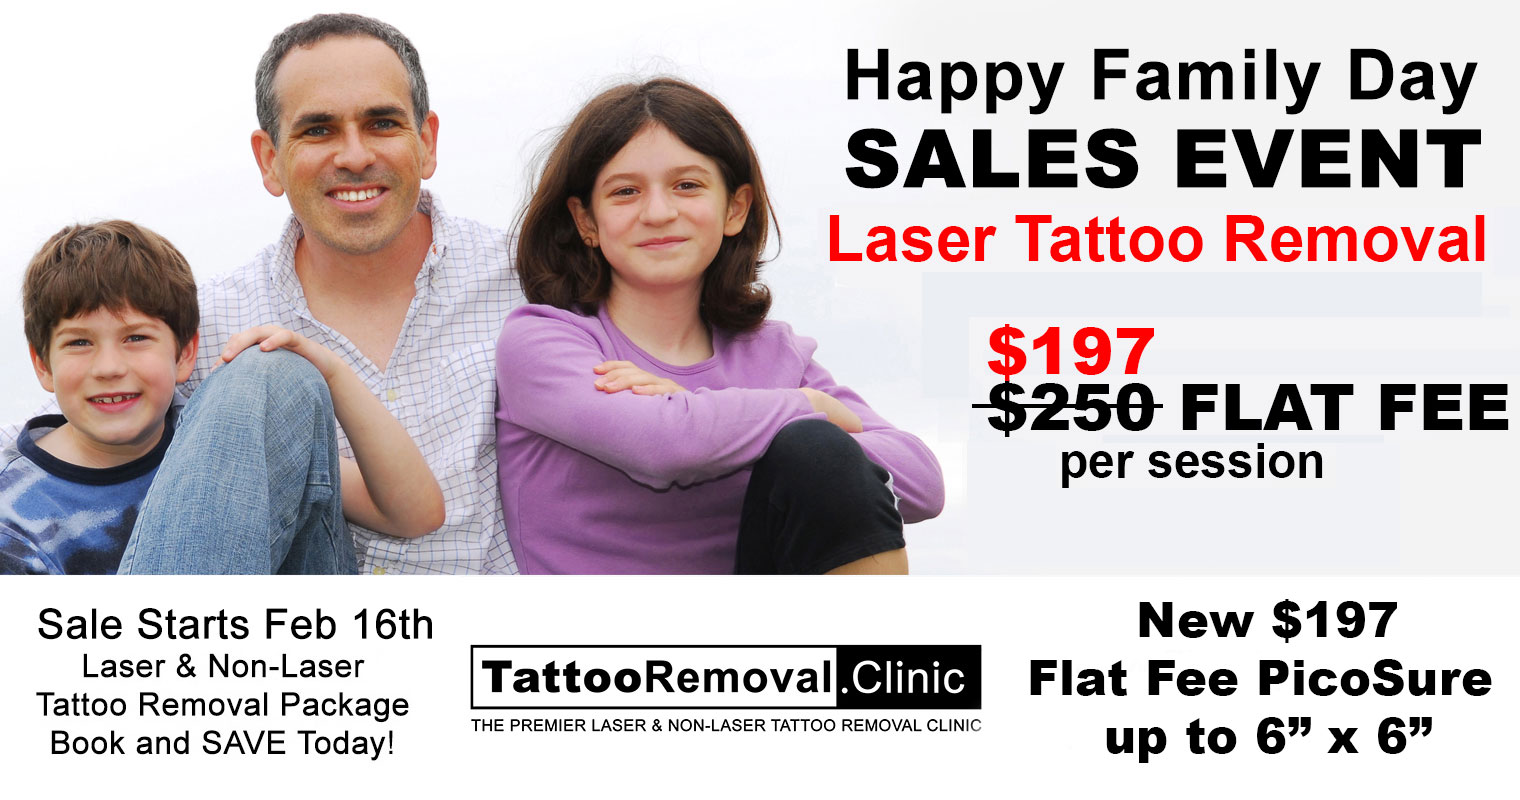 laser-tattoo-removal---Tattoo-Removal-Clinic